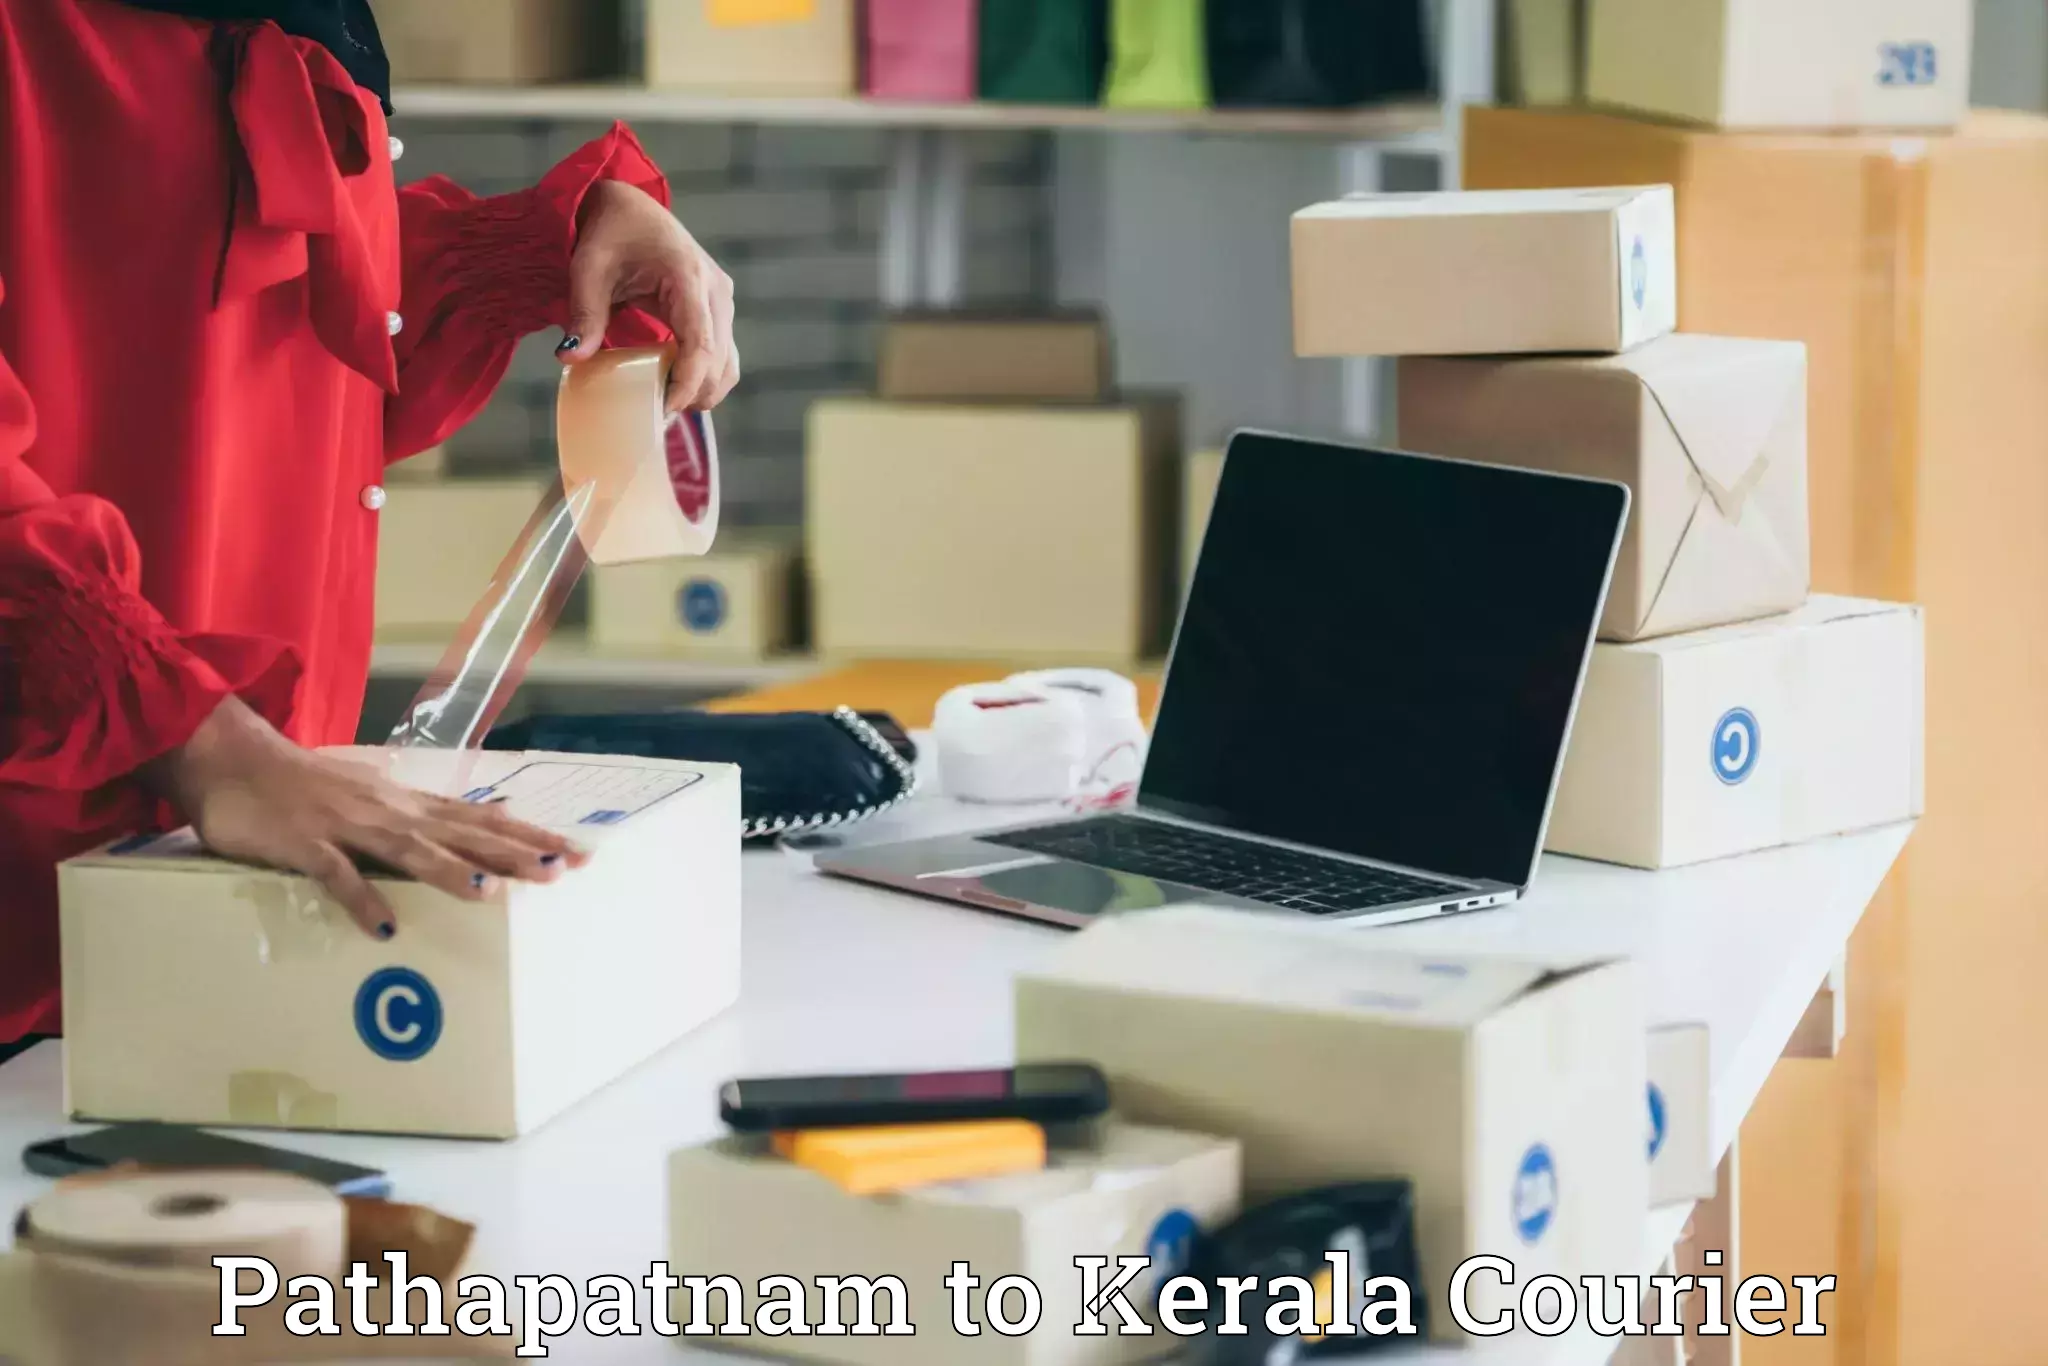 Efficient order fulfillment Pathapatnam to Trivandrum